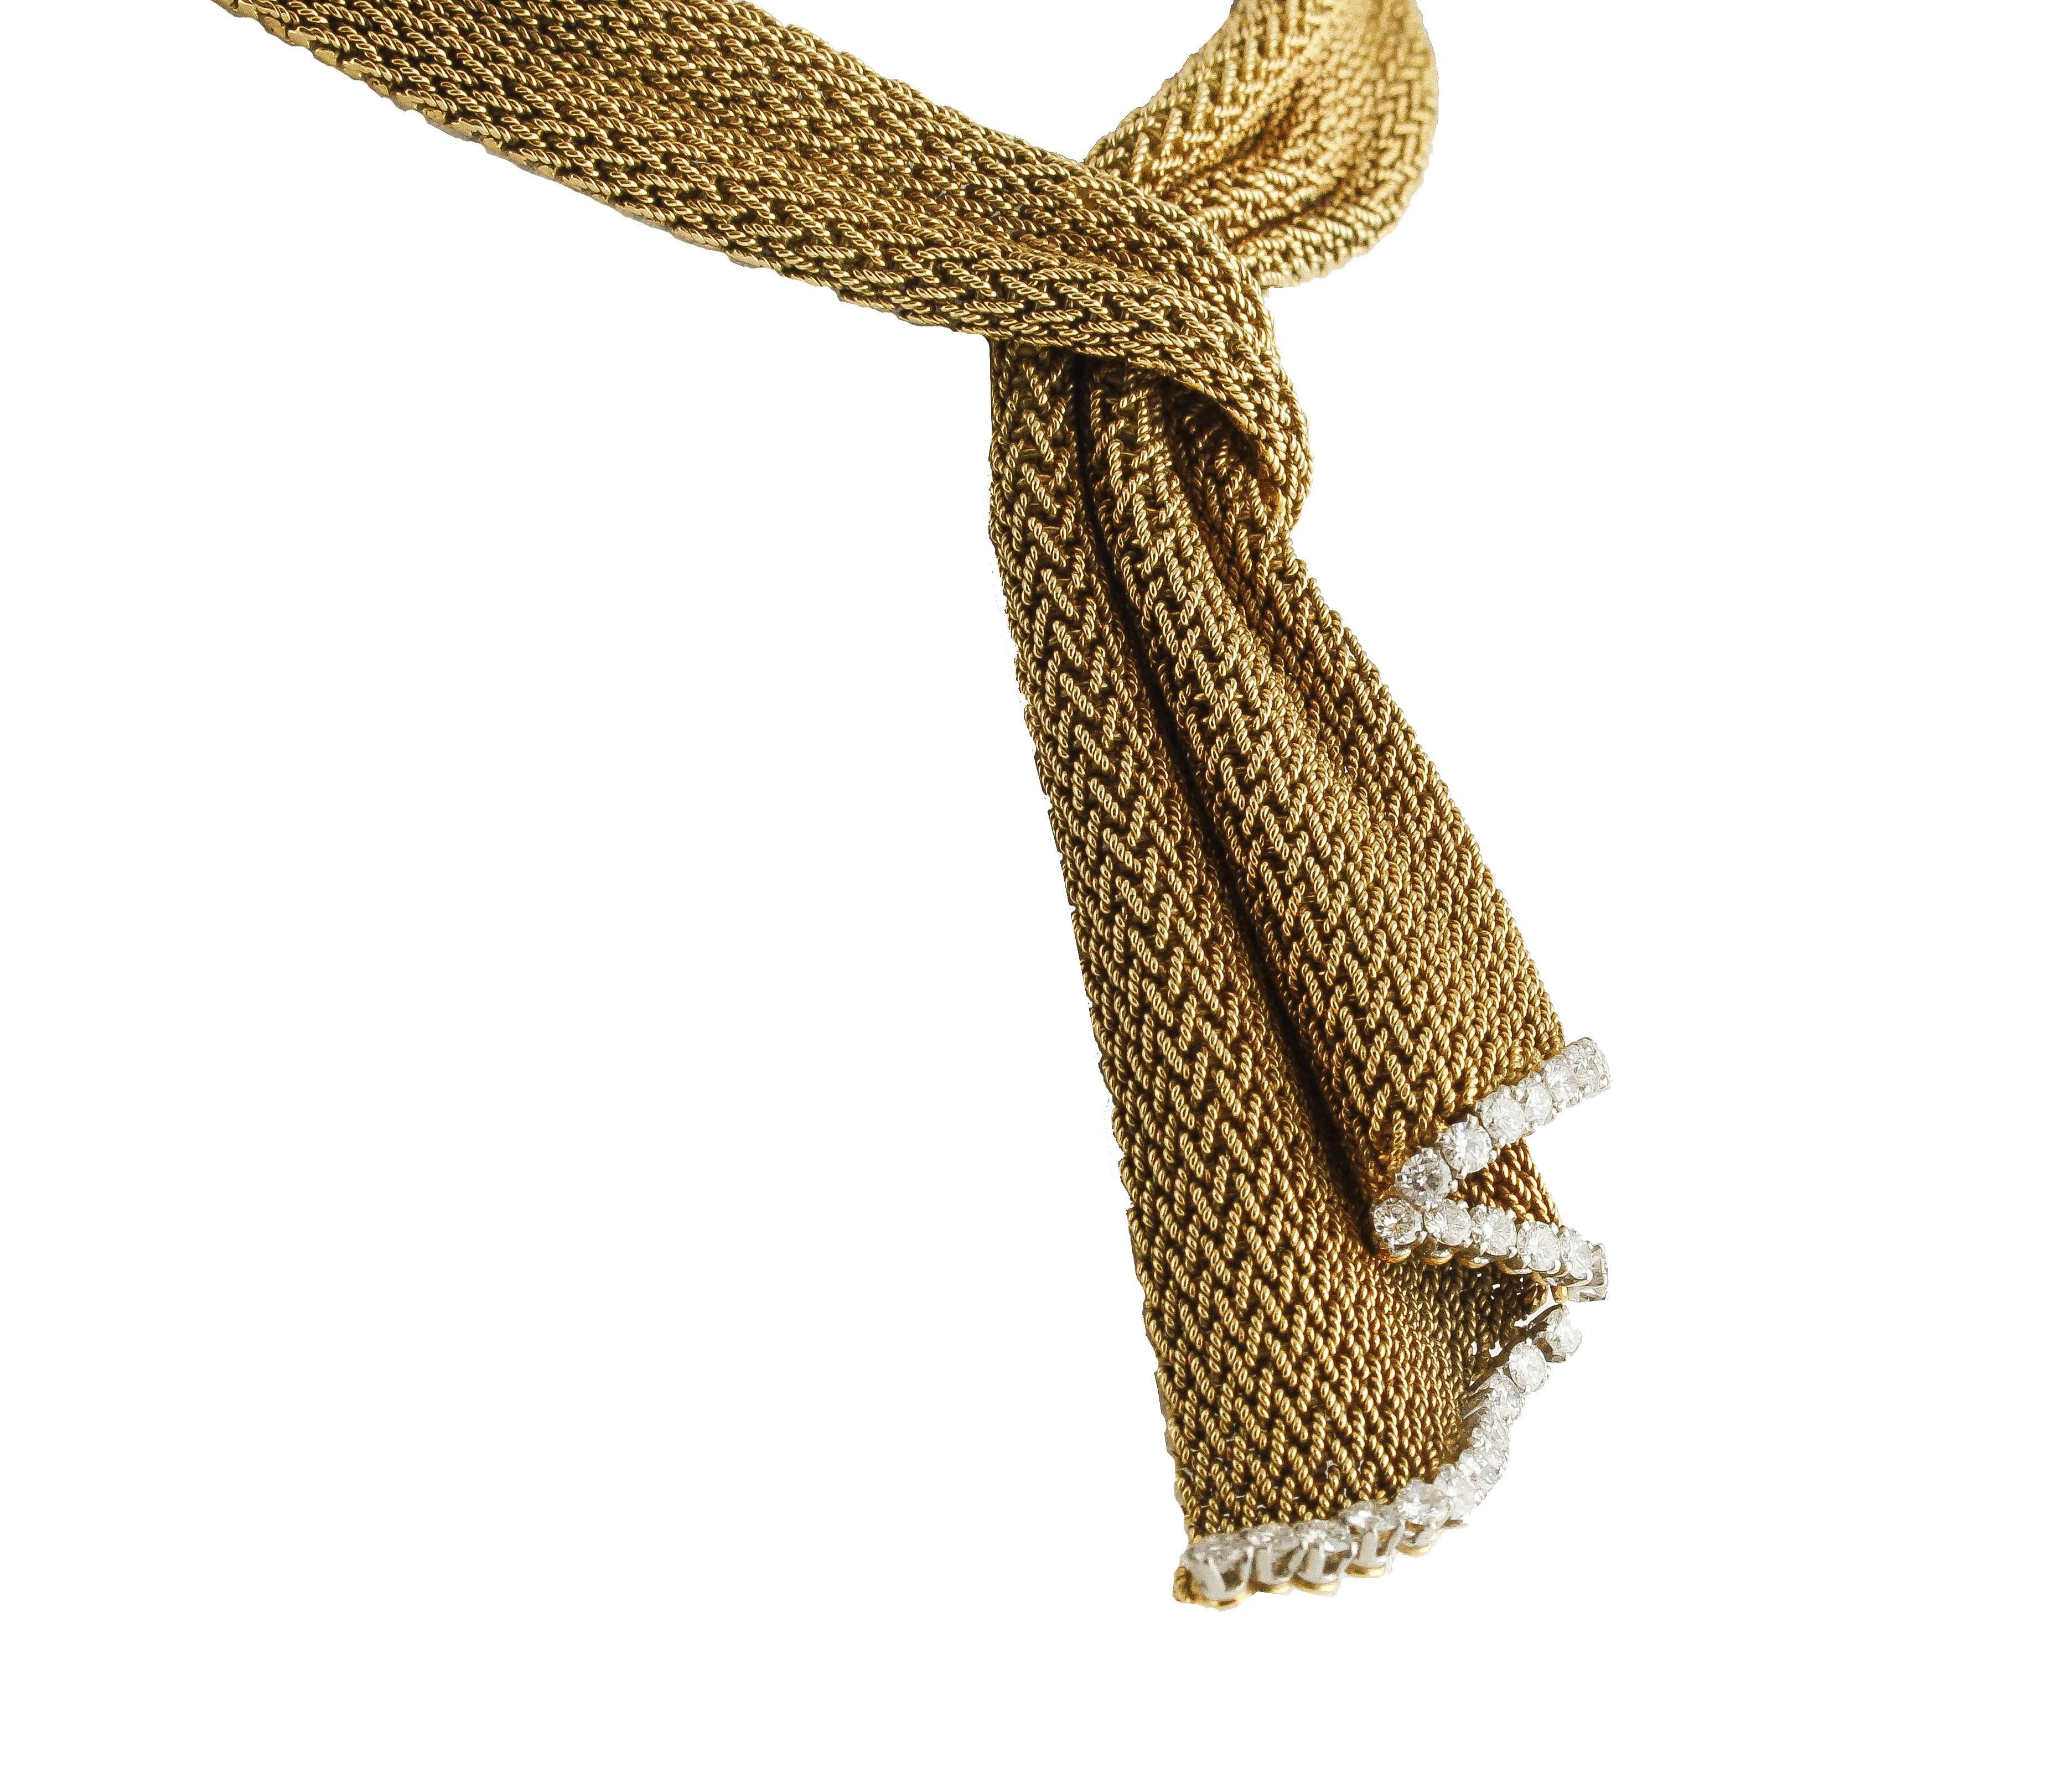 Fabulous French necklace, vintage knitted woven in 18 kt yellow gold, elegant and unique detail, with a soft scarf-shaped design, adorned with ct 3.10 of diamonds  (J color VVS1 )
Diamonds ct 3.10 (JColor VVS1 )
Total weight g 139.00
REF ueuor